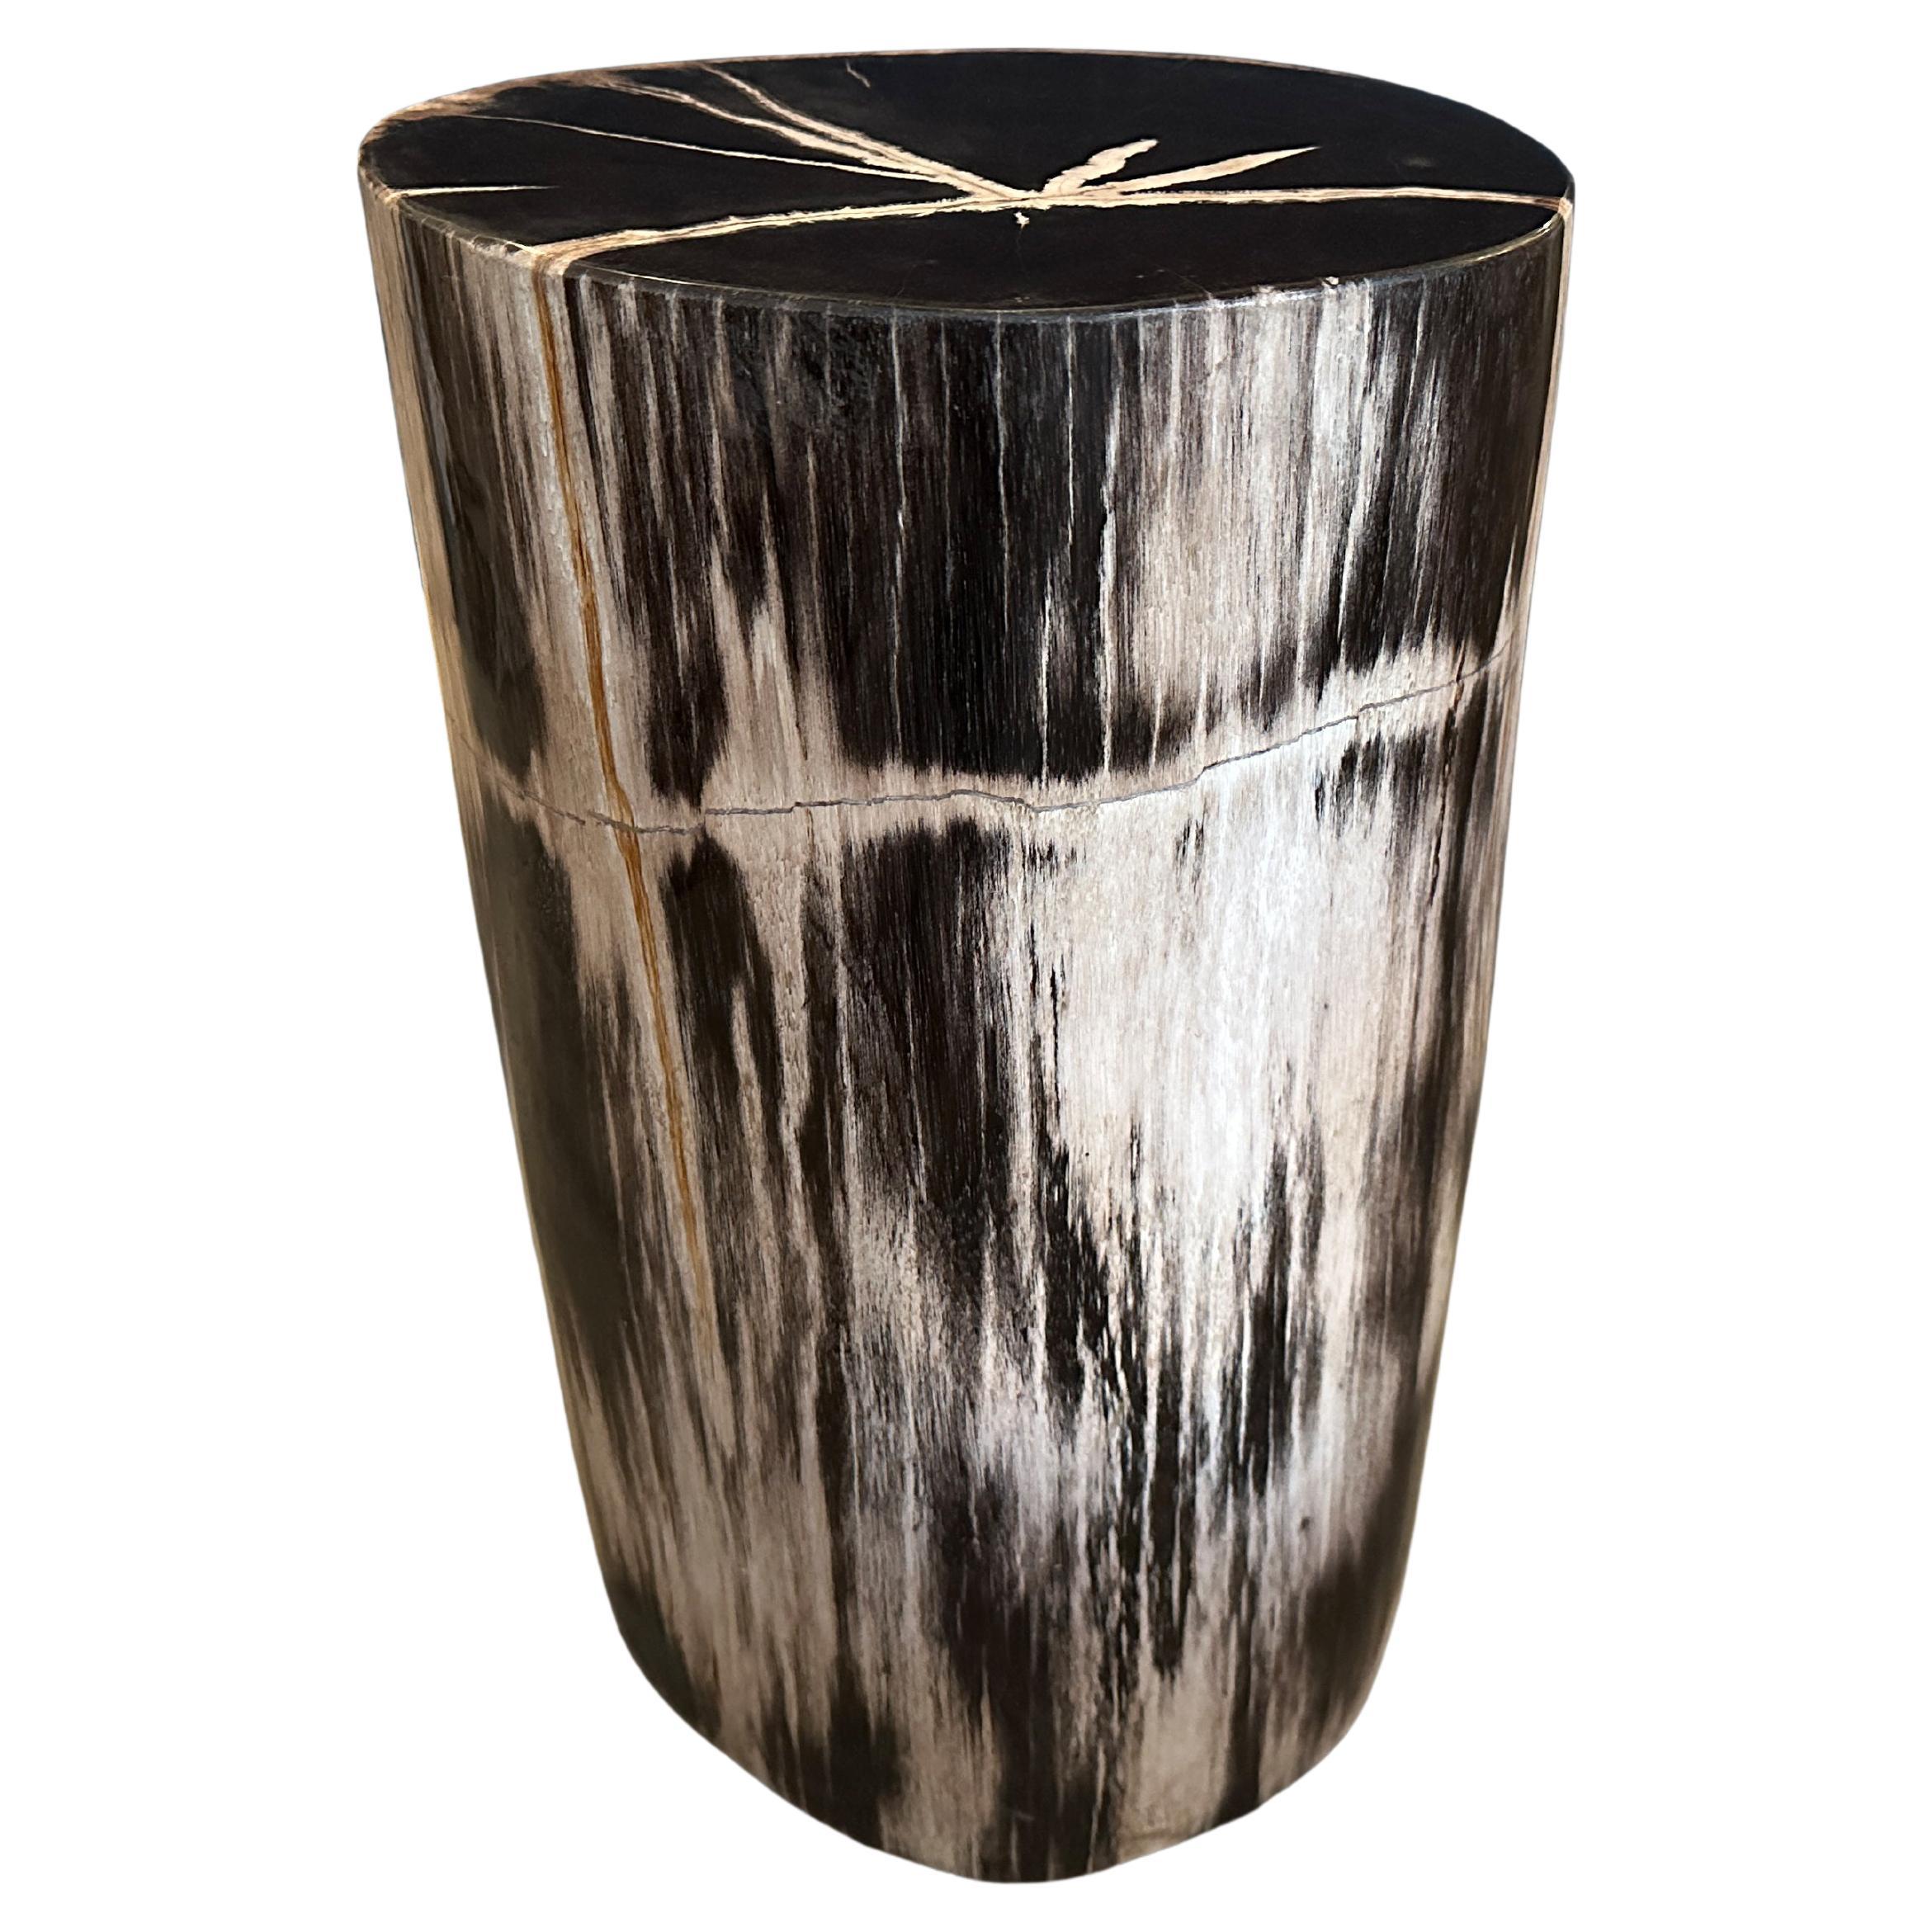 Andrianna Shamaris Super Smooth Quality Petrified Wood Side Table or Pedestal